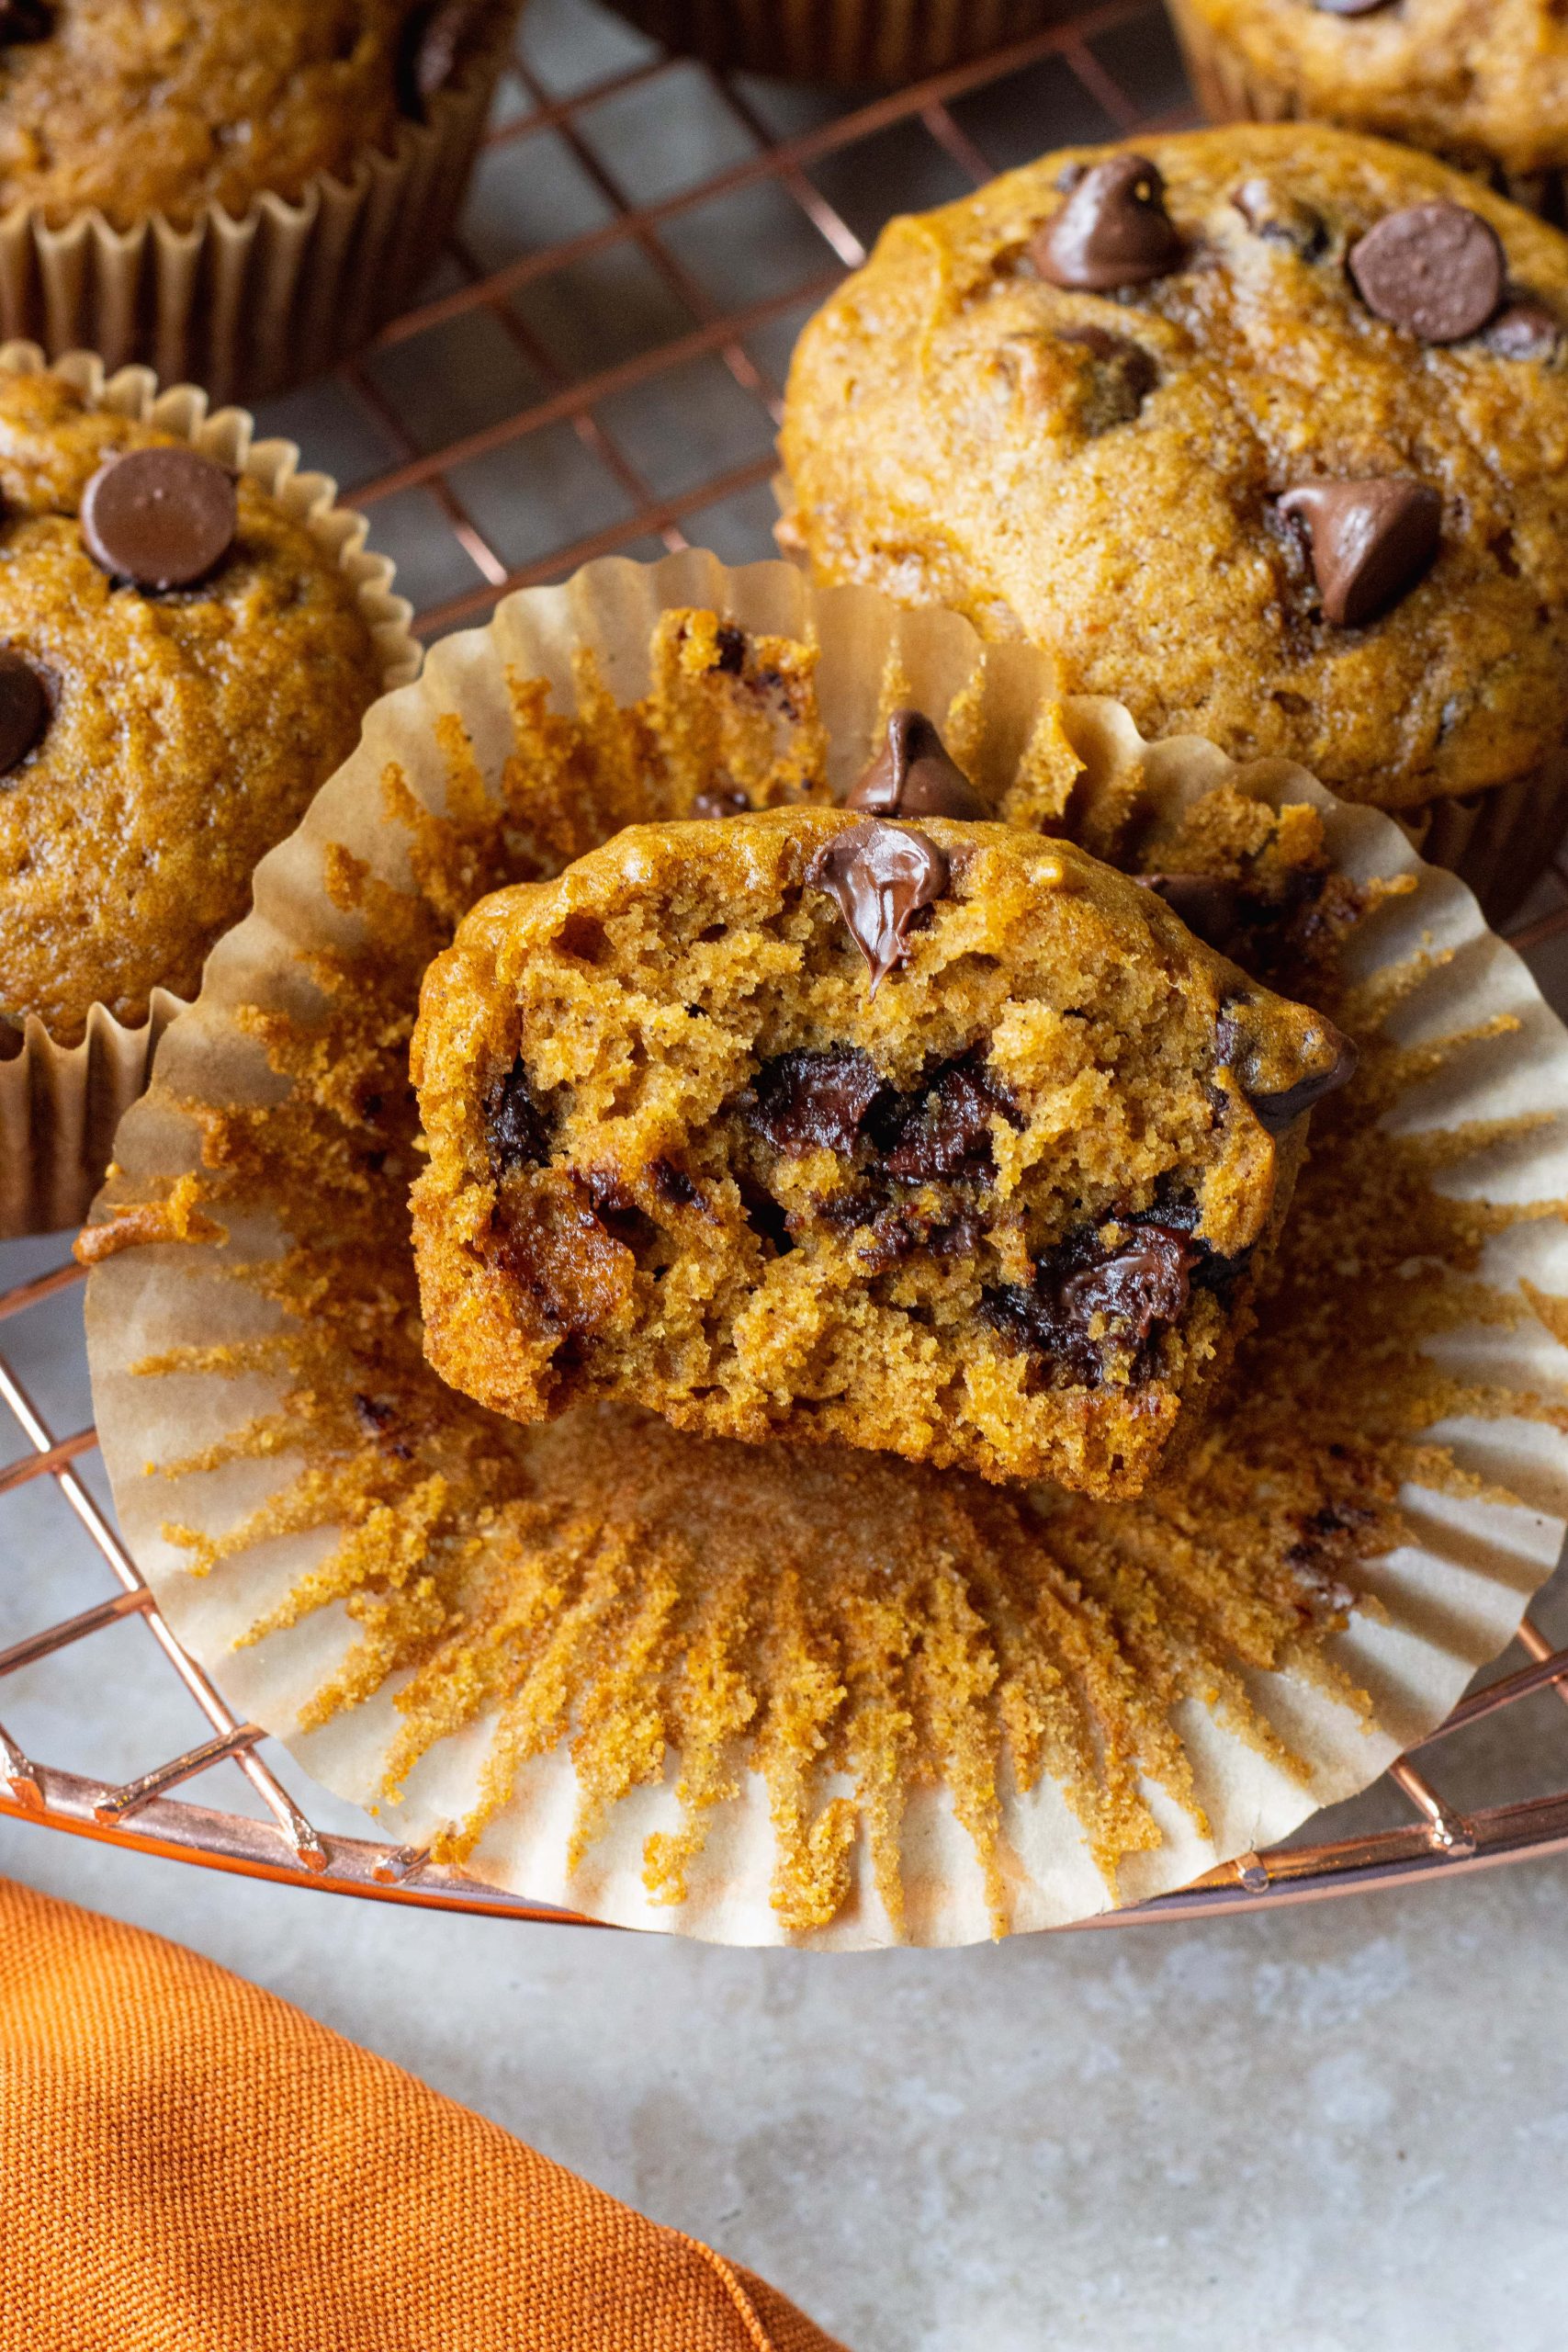 Pumpkin Muffins on a cooling wrack